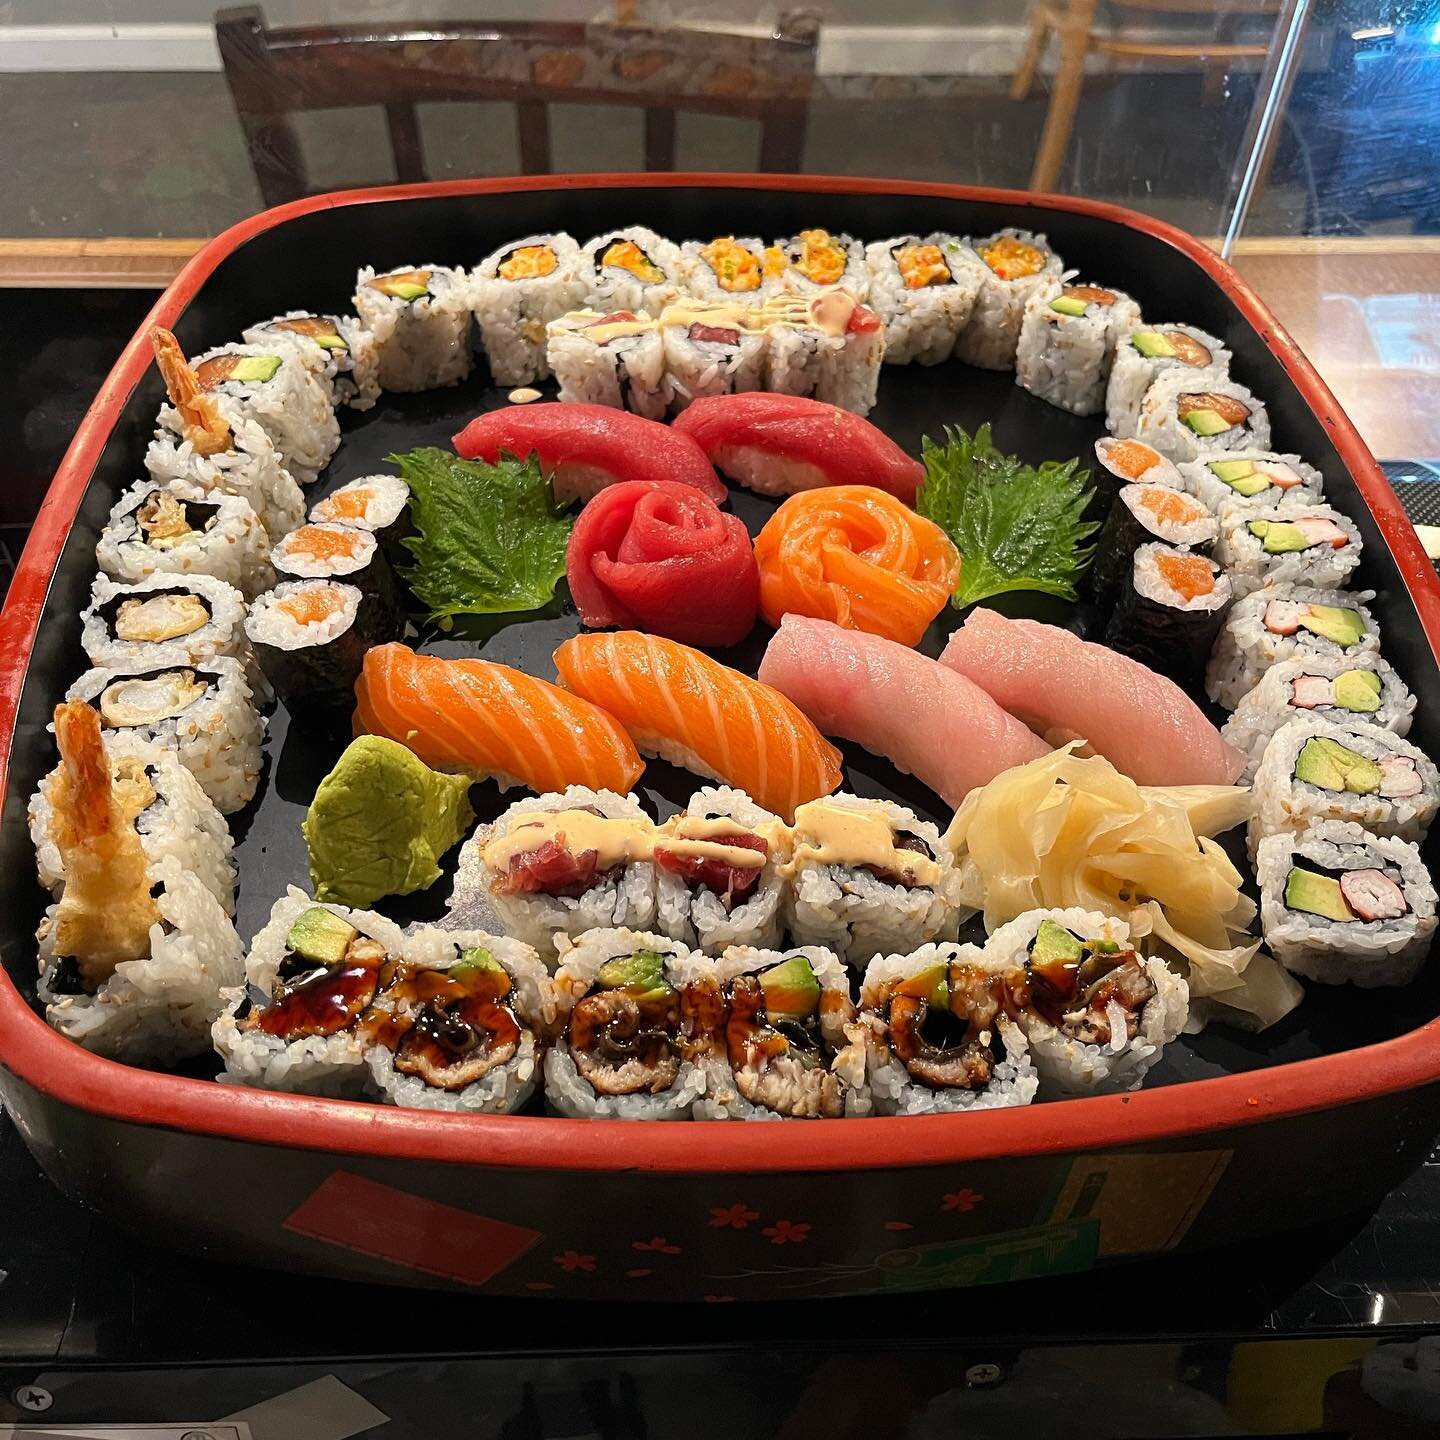 Rose party tray for dine in! &bull;
&bull;
&bull;
&bull;
&bull;
&bull;
&bull;
&bull;
&bull;
&bull;
&bull;
&bull;
&bull;

#sushi #sushilovers #food #sushitime #japanesefood #sashimi #foodie #instafood #delivery #sushilover #sushiroll #comidajaponesa #